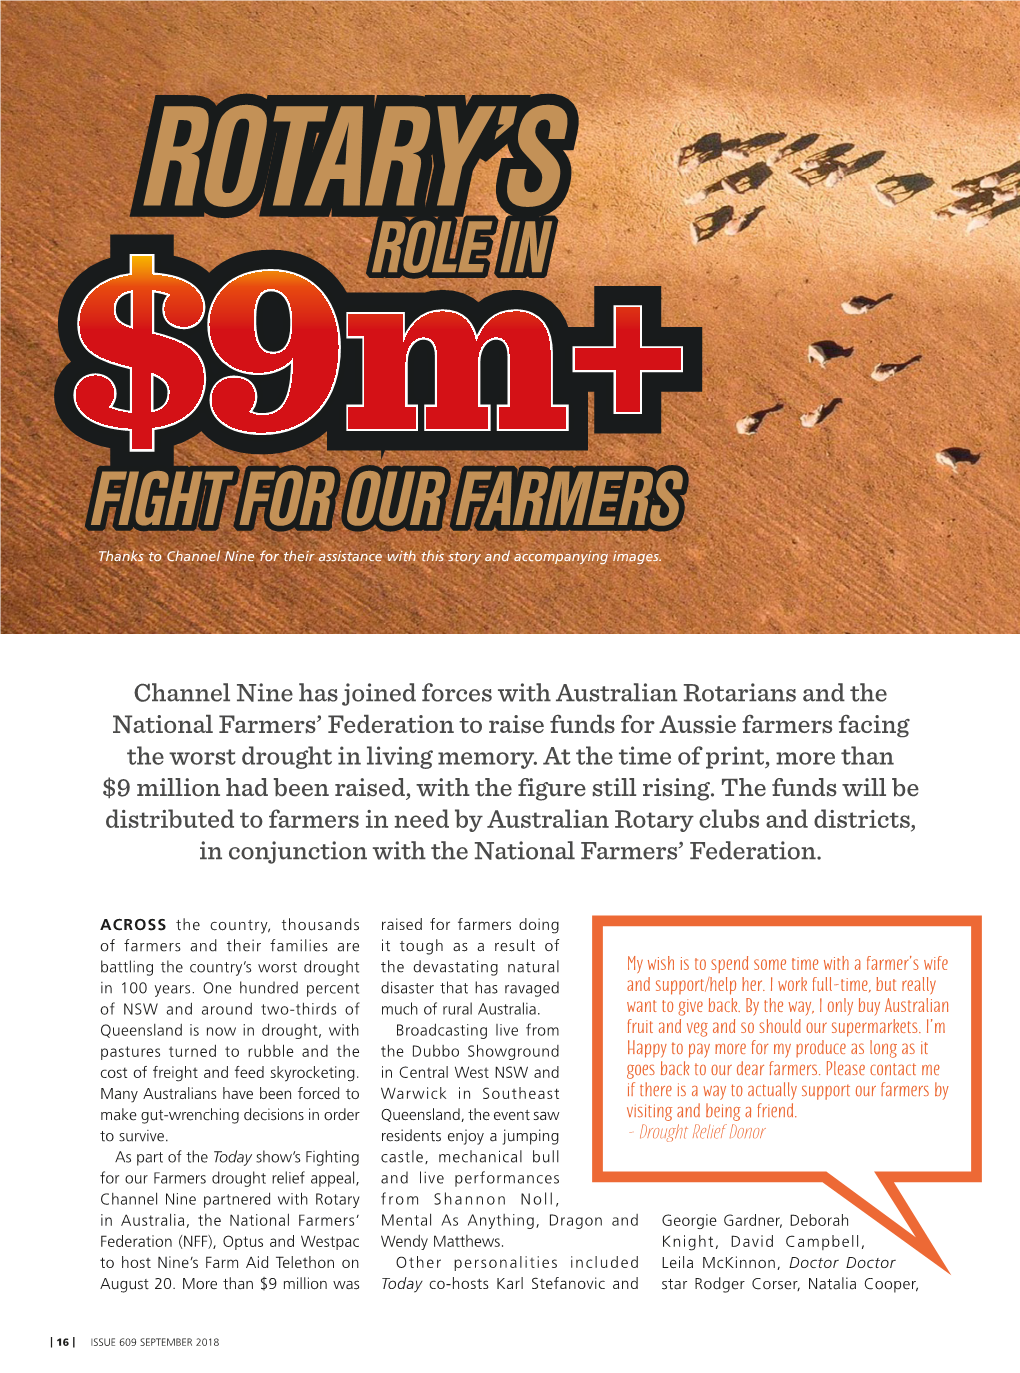 FIGHT for OUR FARMERS Thanks to Channel Nine for Their Assistance with This Story and Accompanying Images